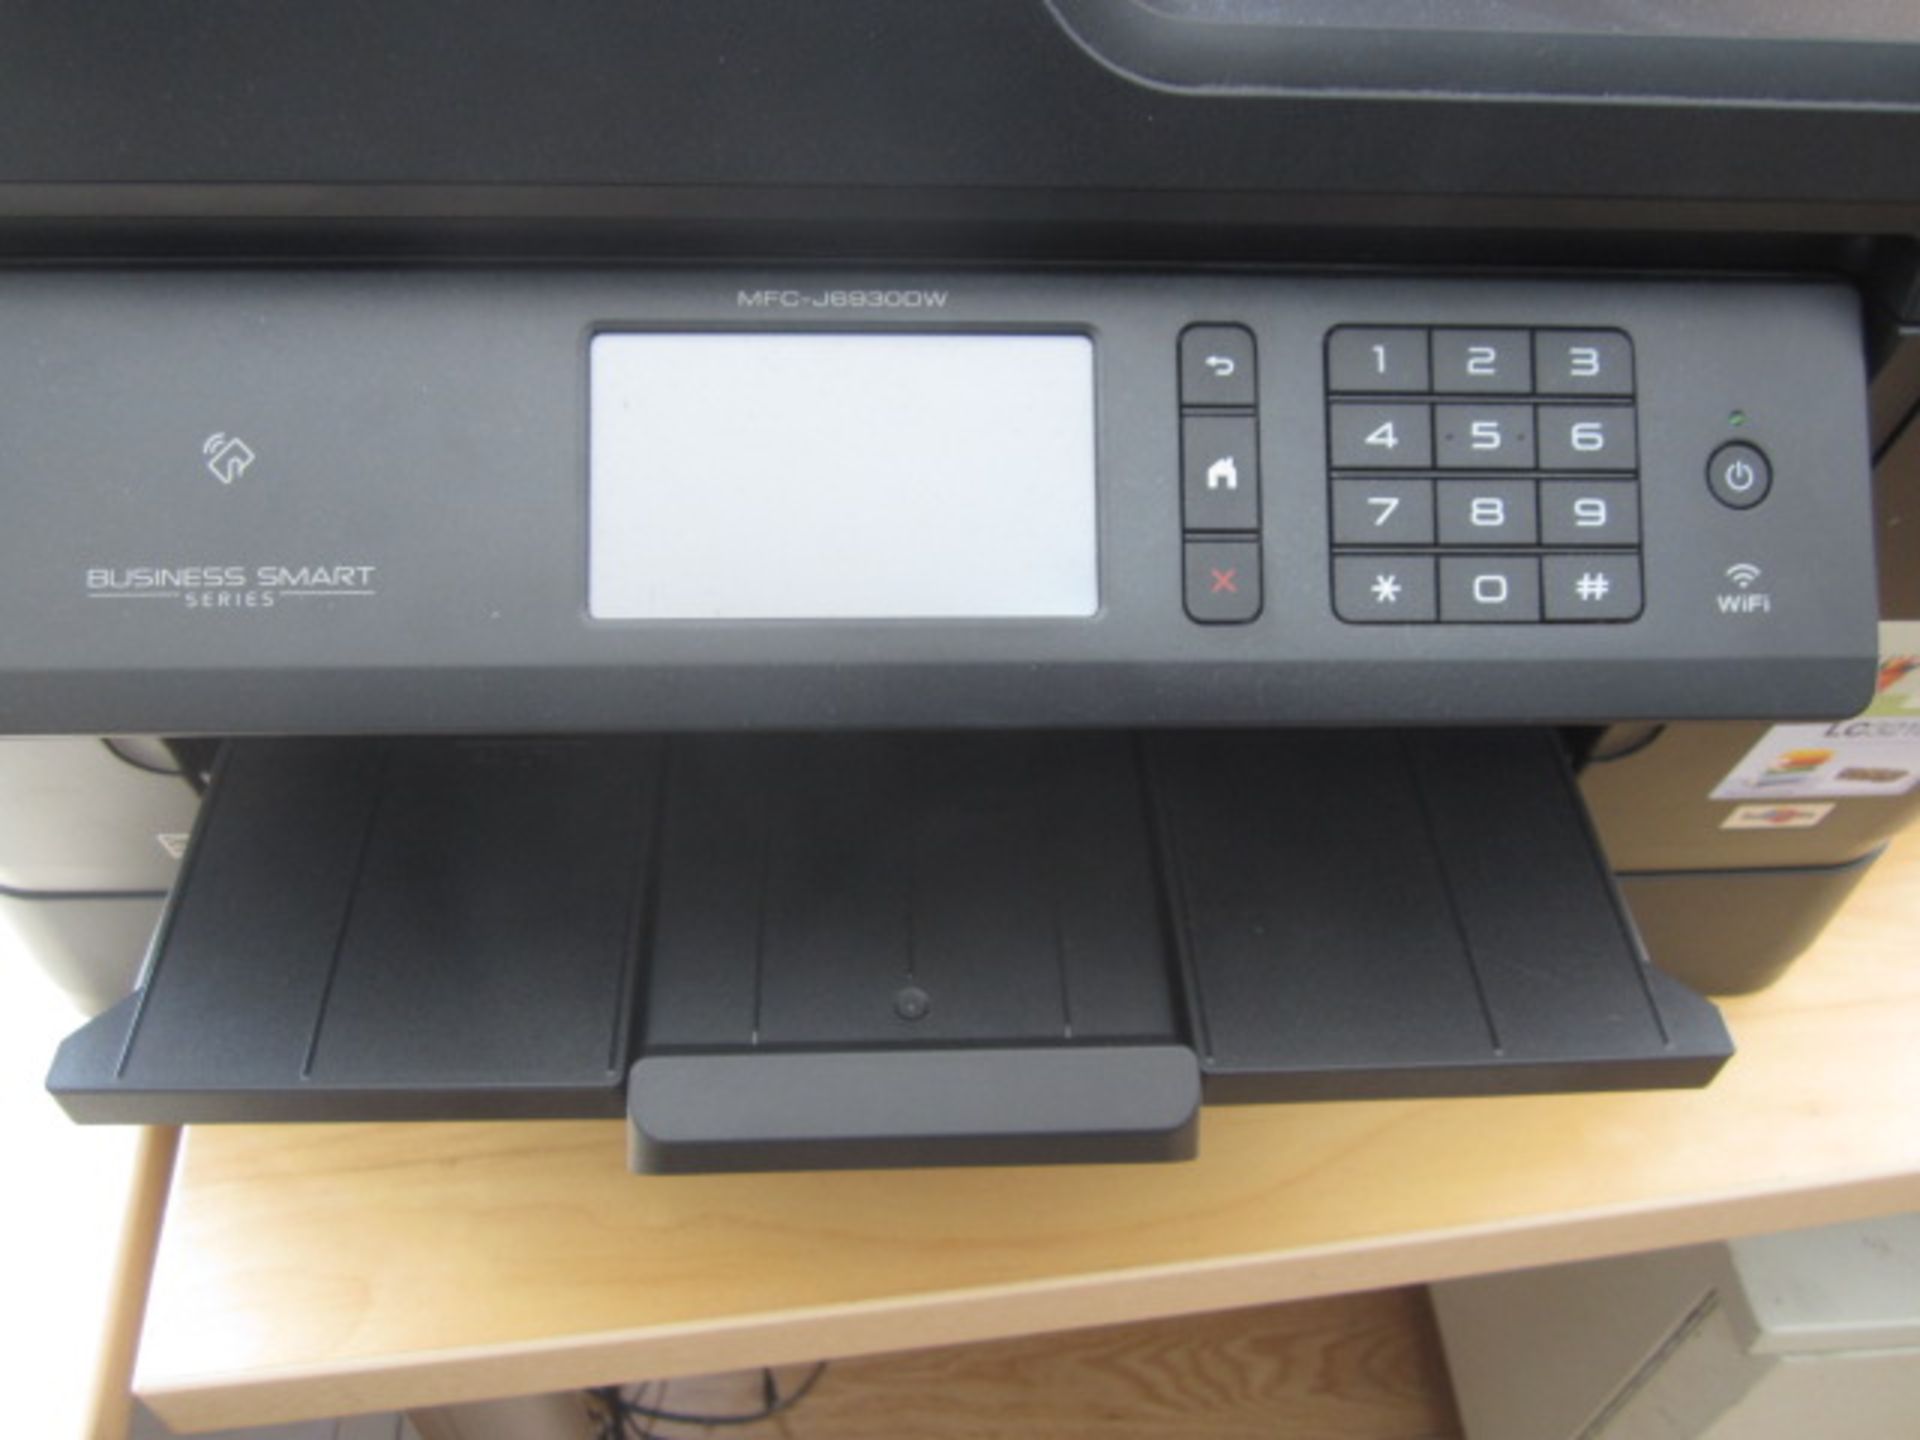 Brother Business Smart Series MFC-J6930DW printer/copier - Image 2 of 2